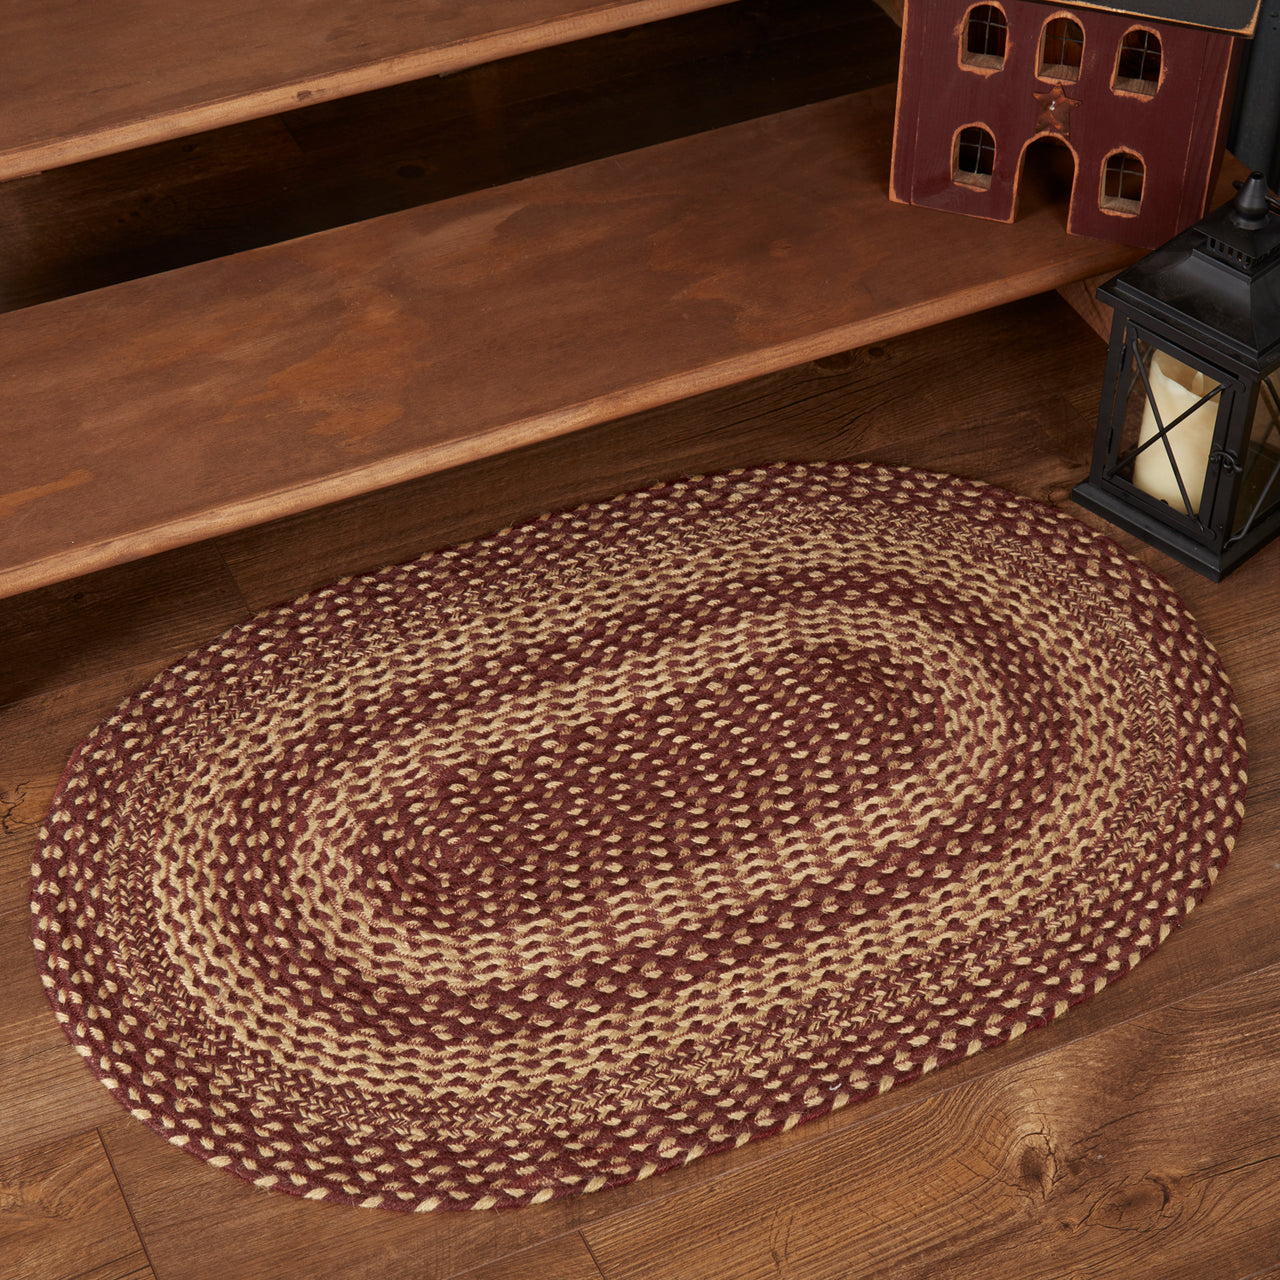 Burgundy Tan Jute Braided Rug Oval 24"x36" (2'x3') with Rug Pad VHC Brands